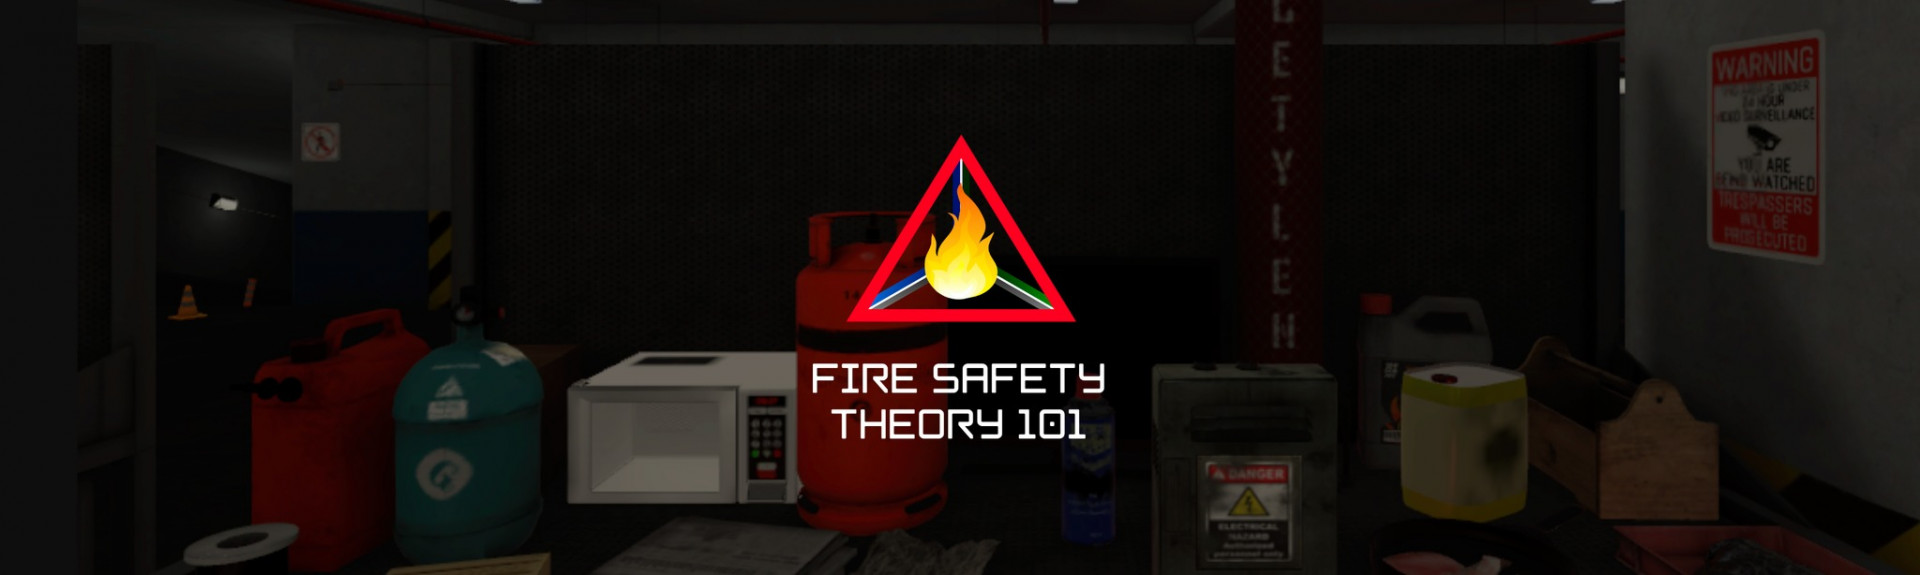 Fire Safety Theory 101